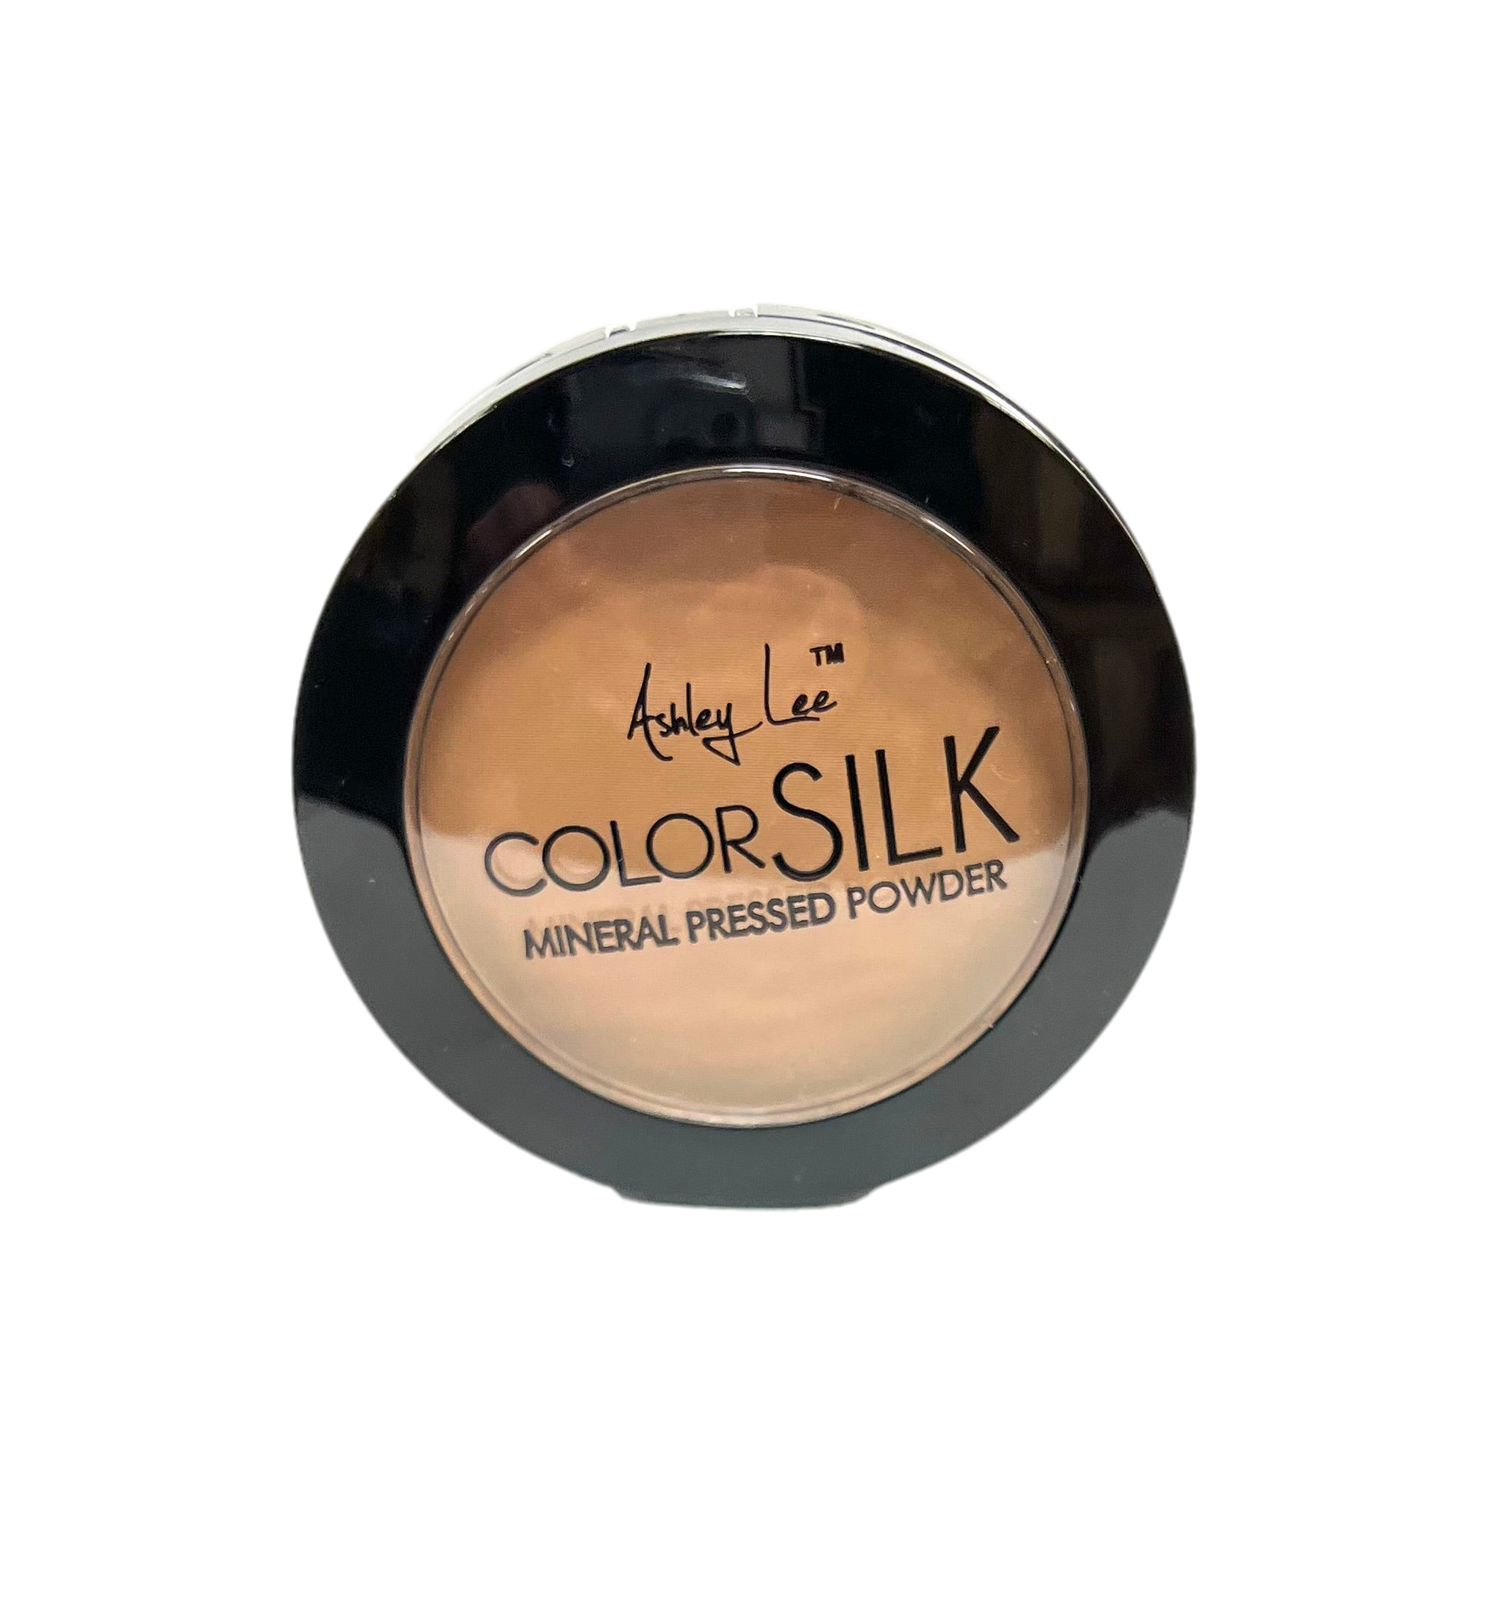 Ashley Lee Color Silk Mineral Pressed Powder - VIP Extensions